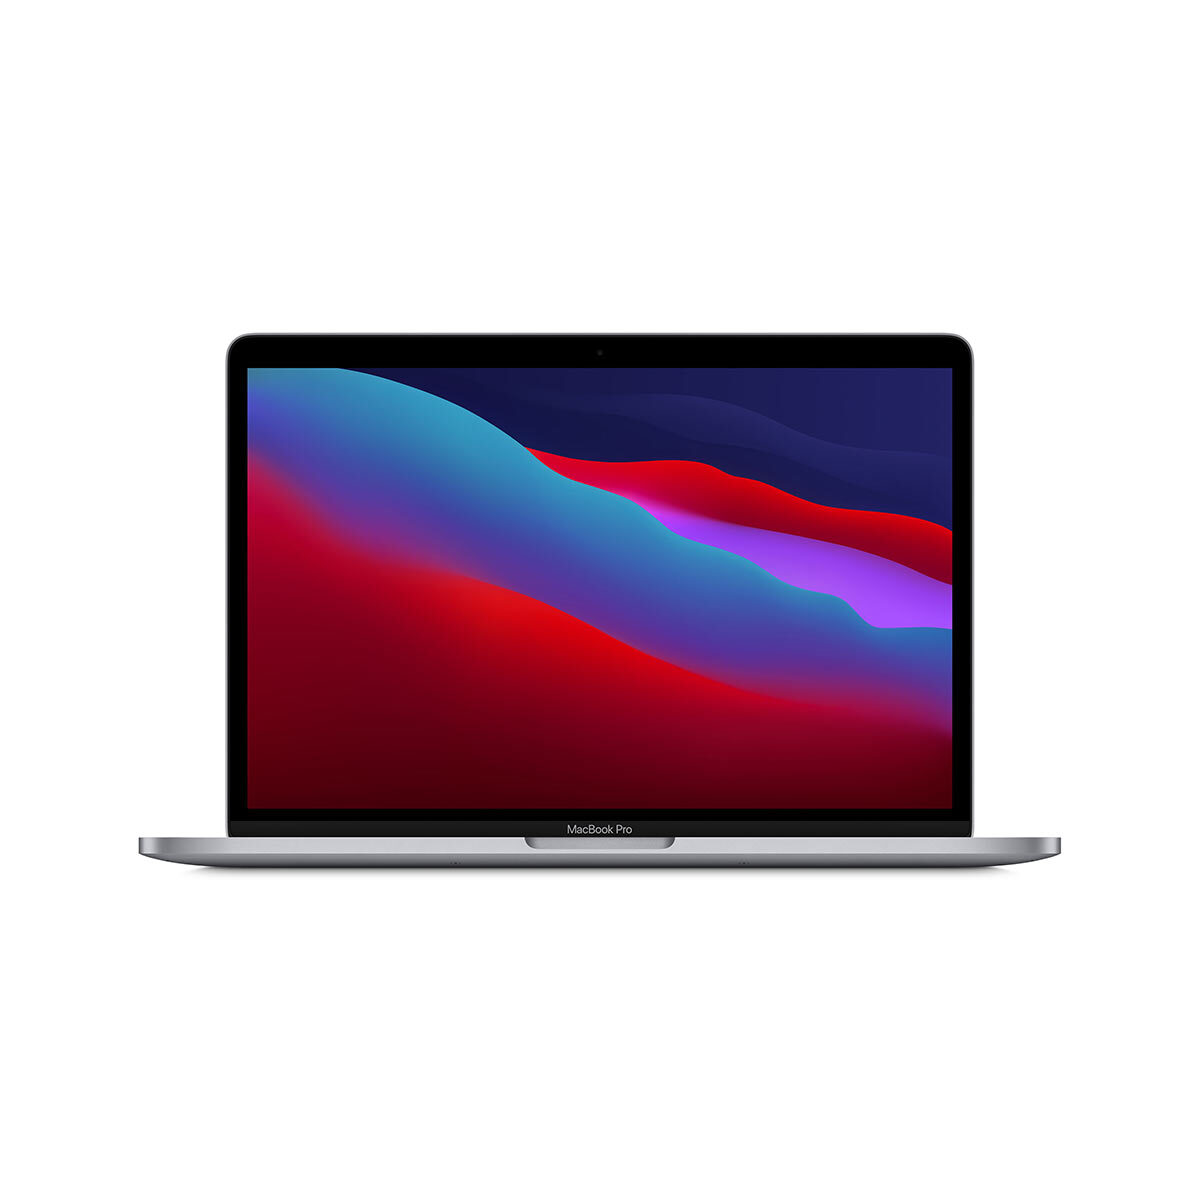 Buy Apple MacBook Pro 2020, Apple M1 Chip, 8GB RAM, 256GB SSD, 13.3 Inch in Space Grey, MYD82B/A at costco.co.uk